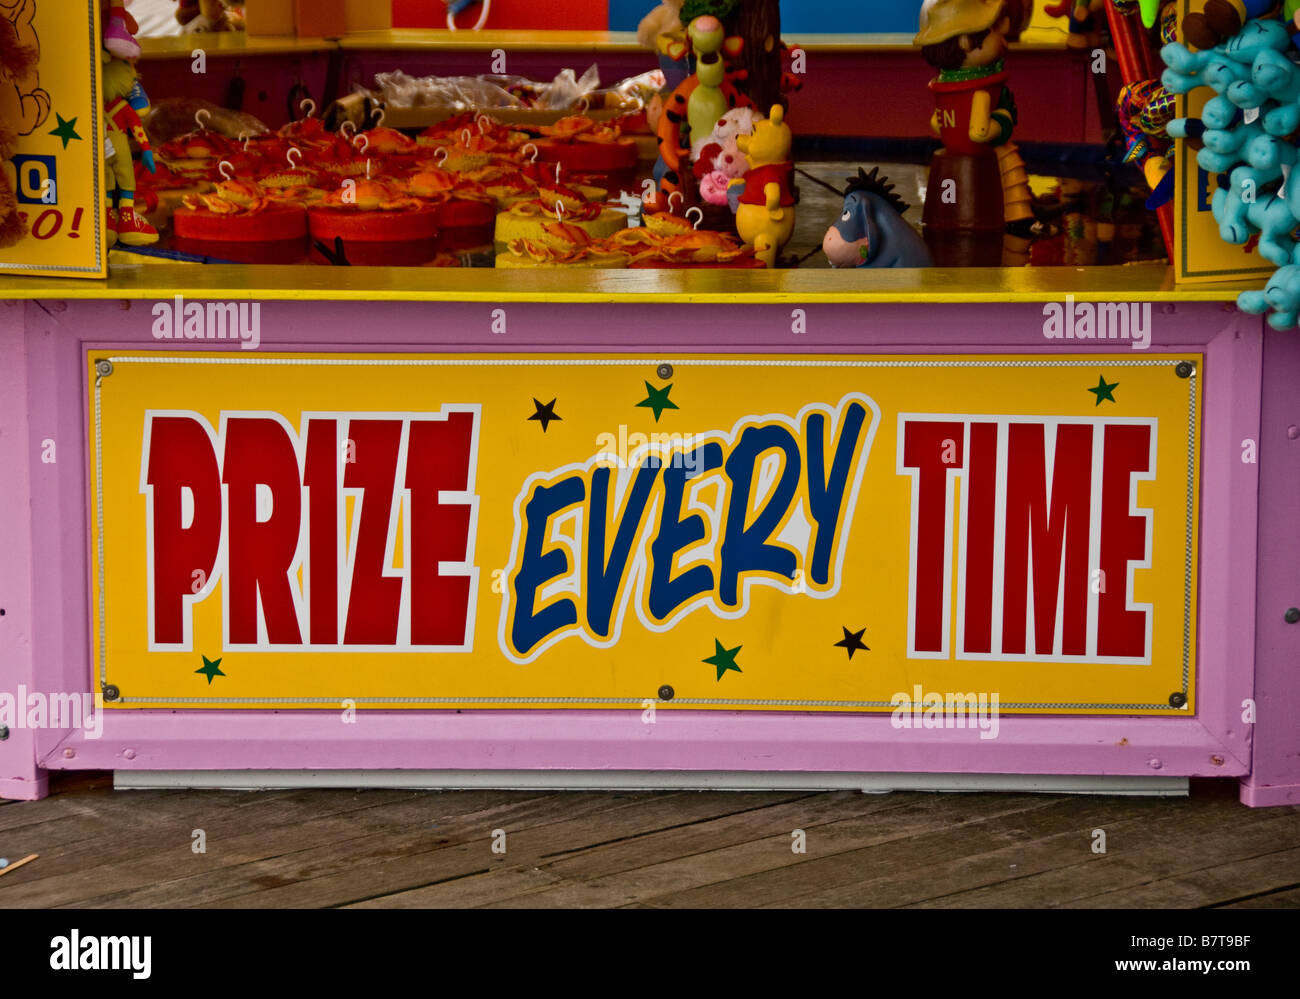 Prize every time sign at seaside amusements. UK. Stock Photo